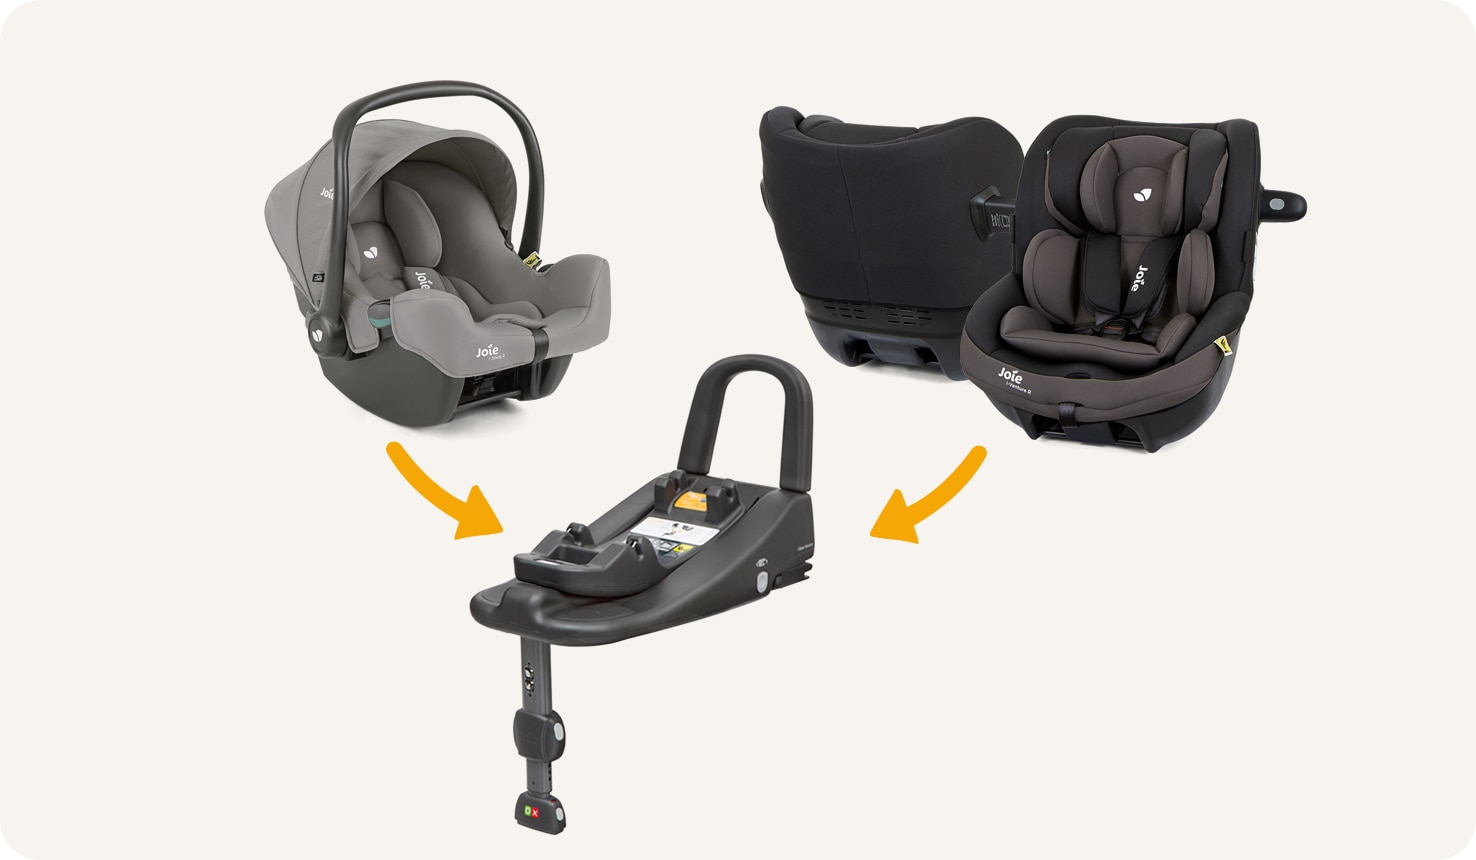 Joie i-Snug infant seat sits above and to the left of a car seat base, and the Joie i-Venture R toddler seat sits above and to the right of the base. Both car seats have arrows pointing down at the base.